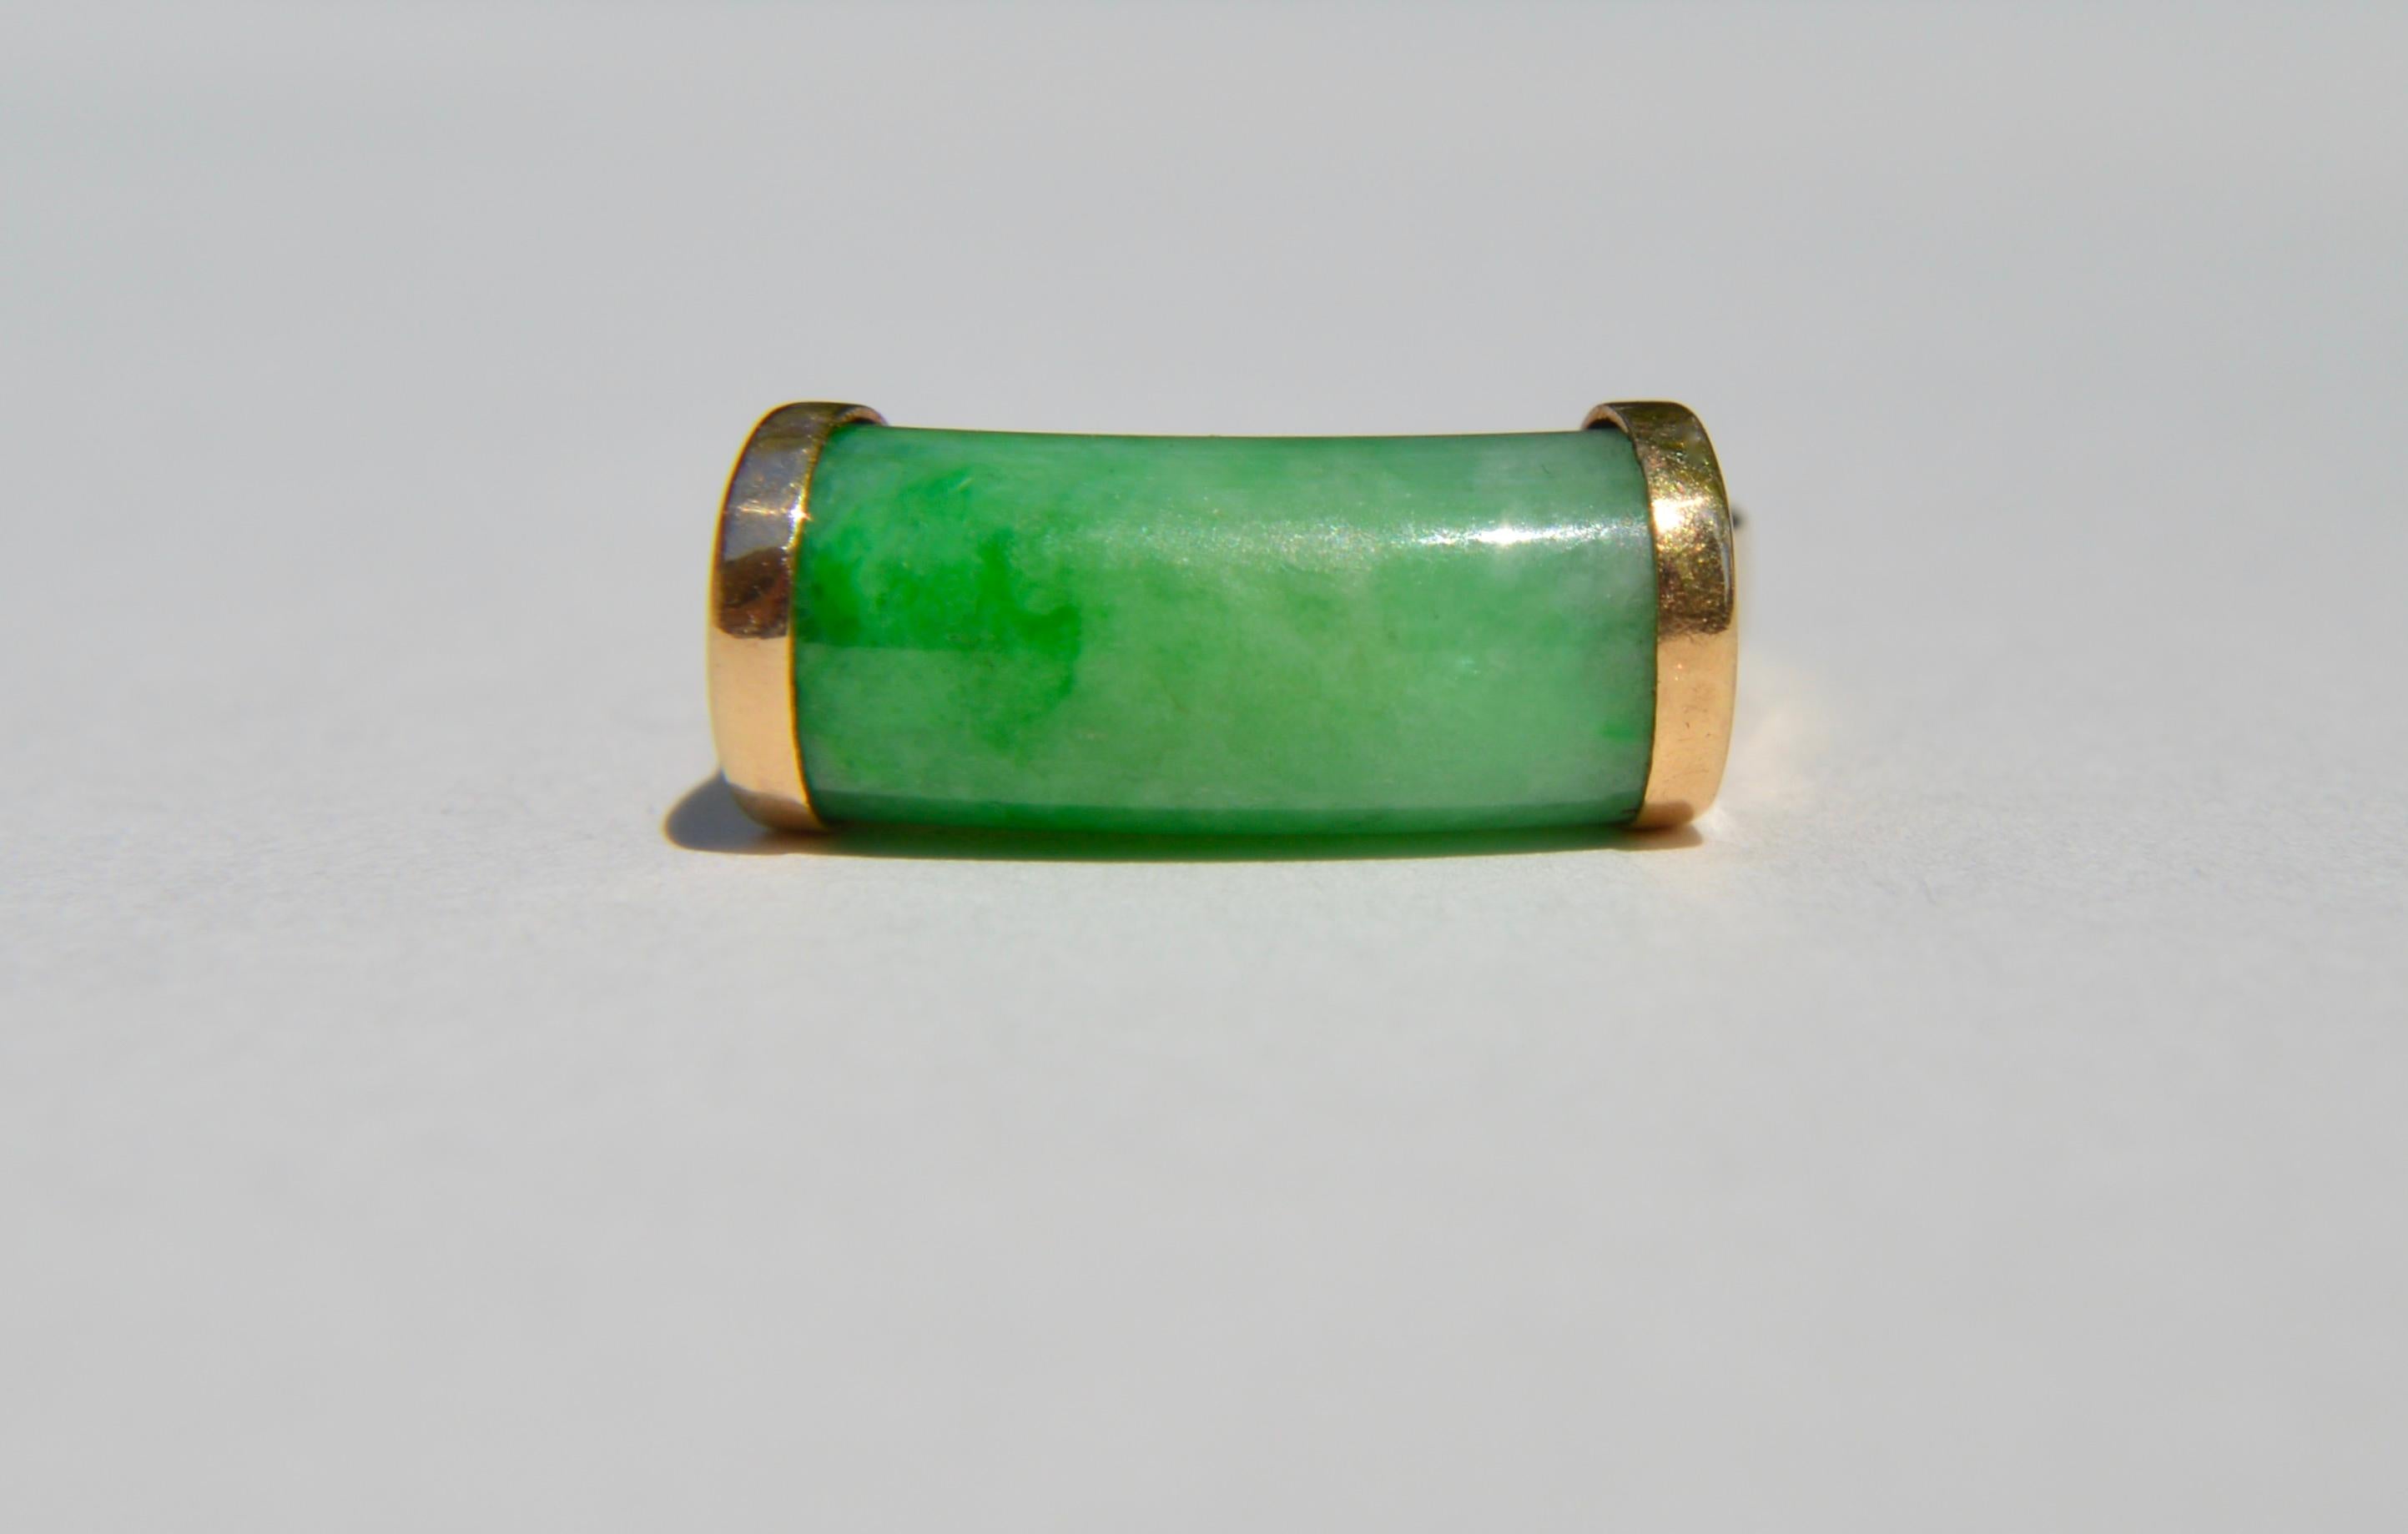 Beautiful vintage Midcentury era circa 1960s jadeite jade cylinder bar ring in solid 18K yellow gold. Size 7.5, can be resized by a jeweler. In very good condition. The apple green jade cylinder measures 13x8mm. The shank measures 3mm wide. Marked